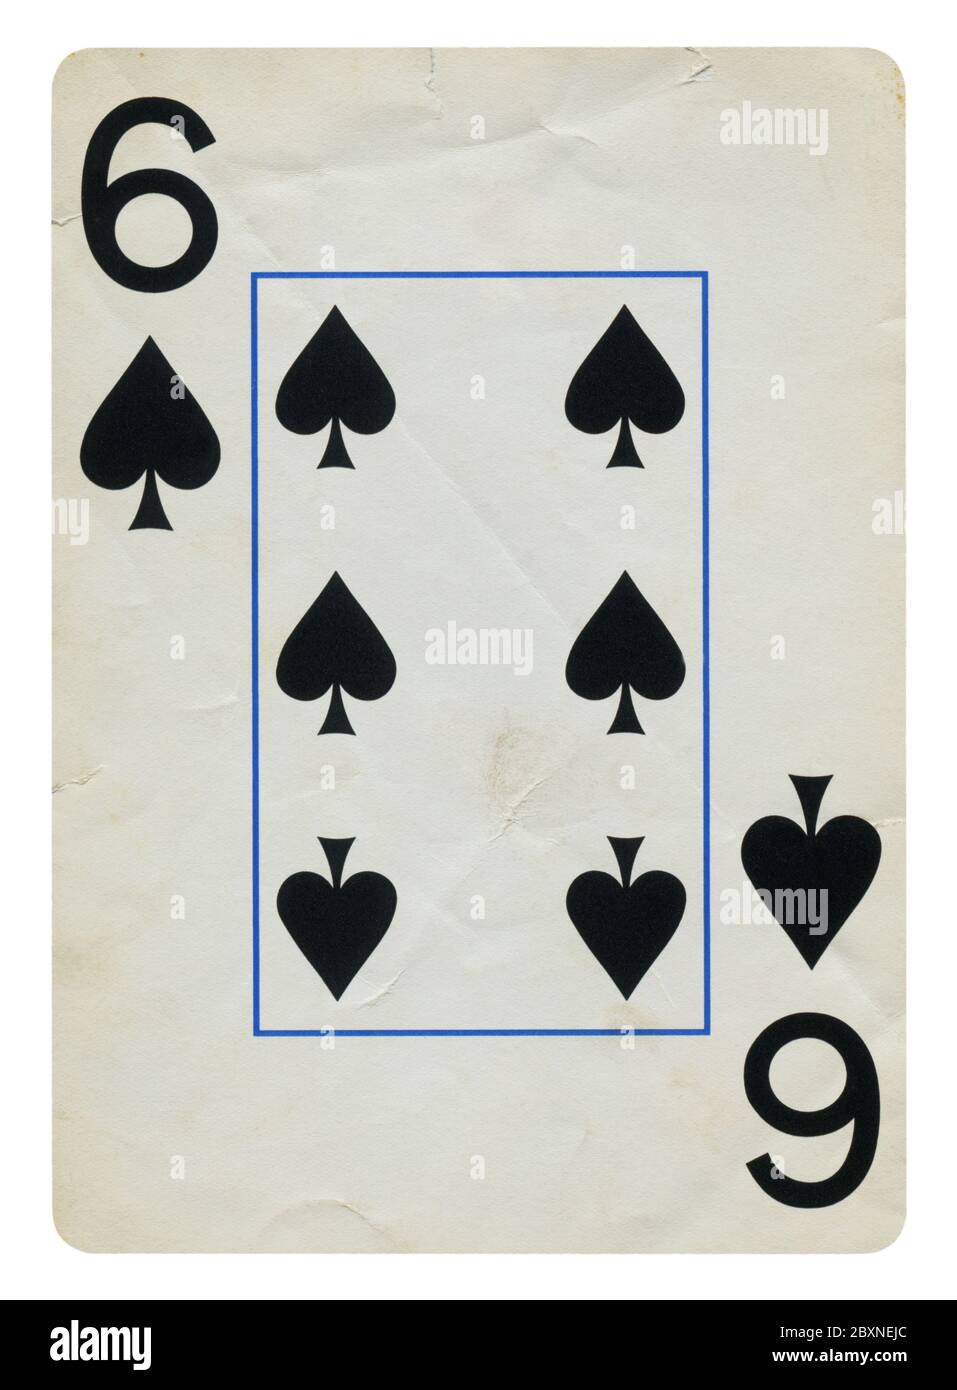 Six of Spades Vintage playing card - isolated on white (clipping path included) Stock Photo